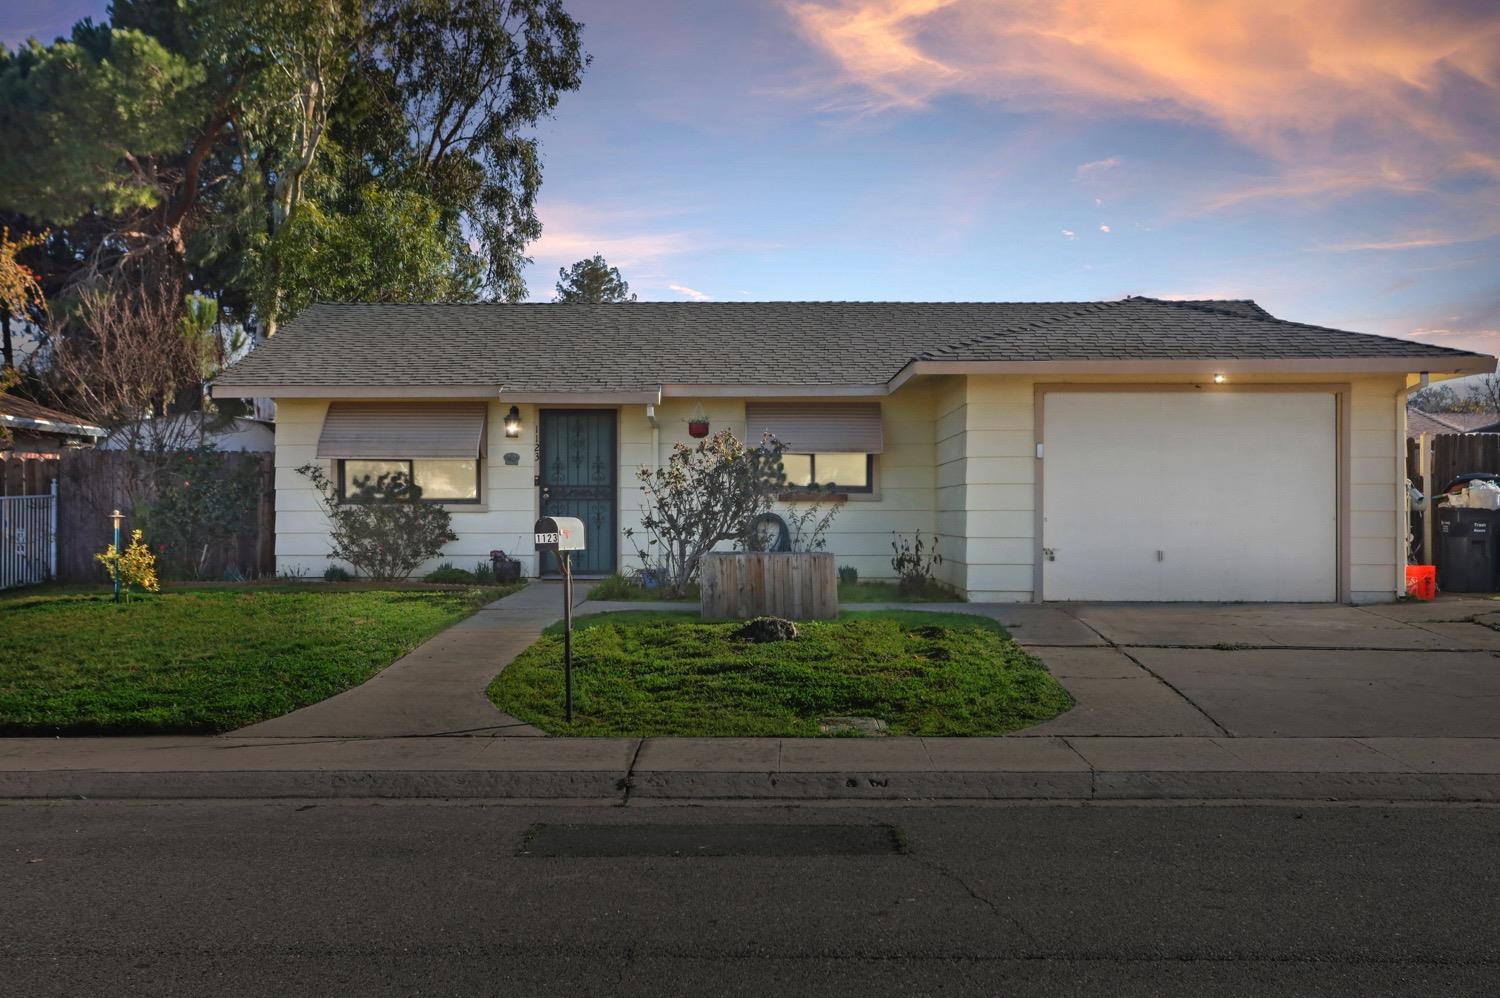 This is an ideal home for first time home buyers! Home features a remodeled bathroom and has ceiling fans central heat and air. Fall in love with the large backyard that will be great for entertaining friends and family.